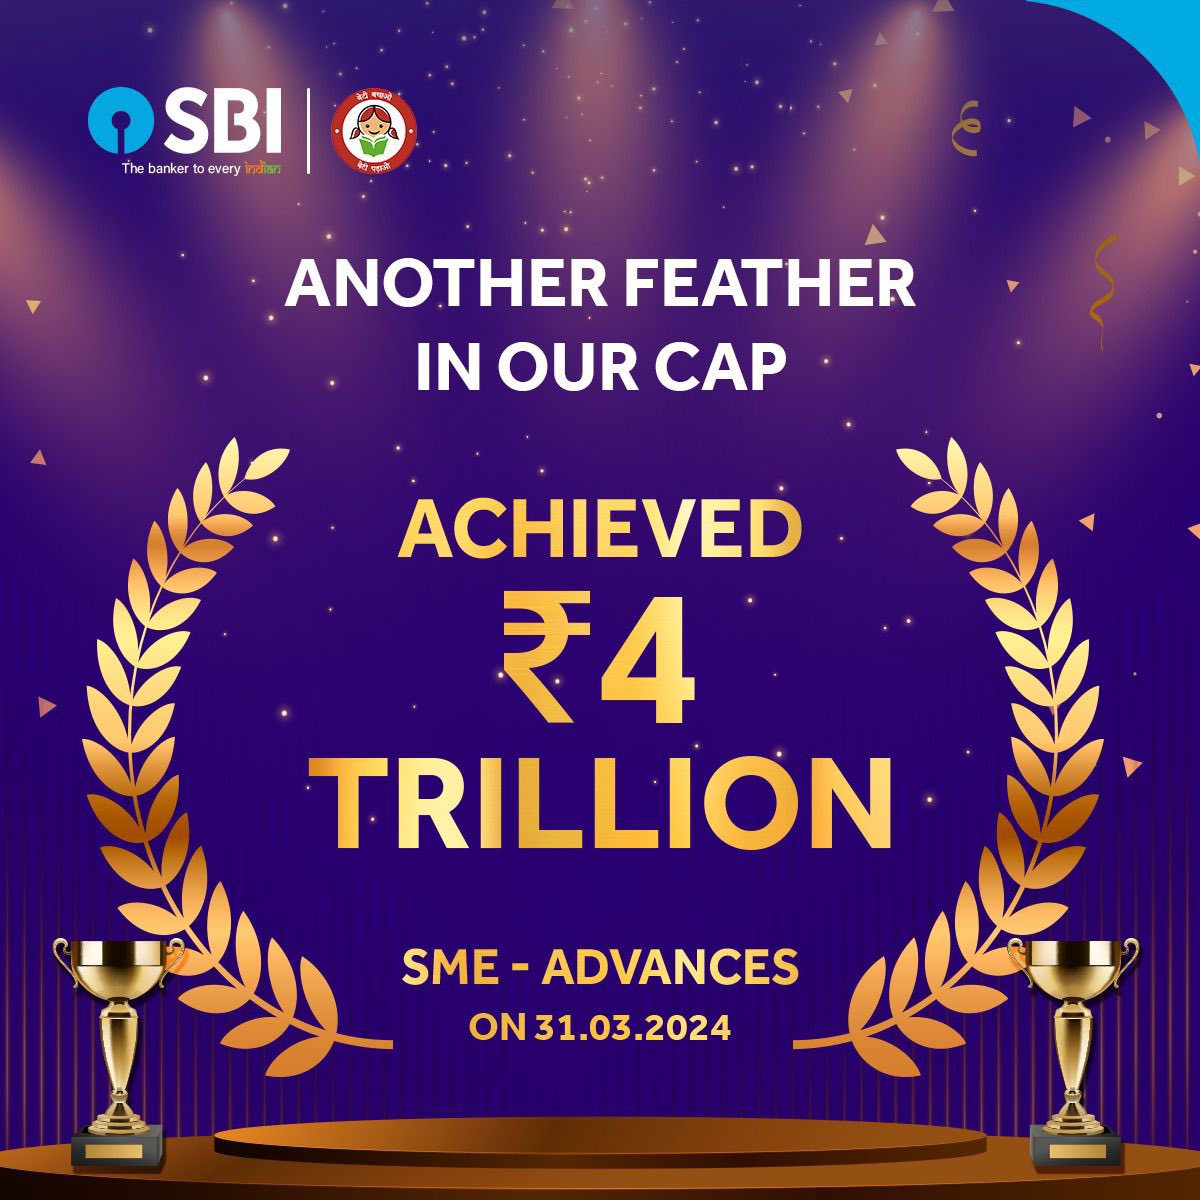 #AheadOfTheCurve

We are happy to share that SBI has achieved another significant milestone of 4 Trillion SME Advances on 31.03.2024. 

Our heartfelt thanks to all our entrepreneur customers, Staff Members and other Stakeholders for their unwavering trust reposed in us and also